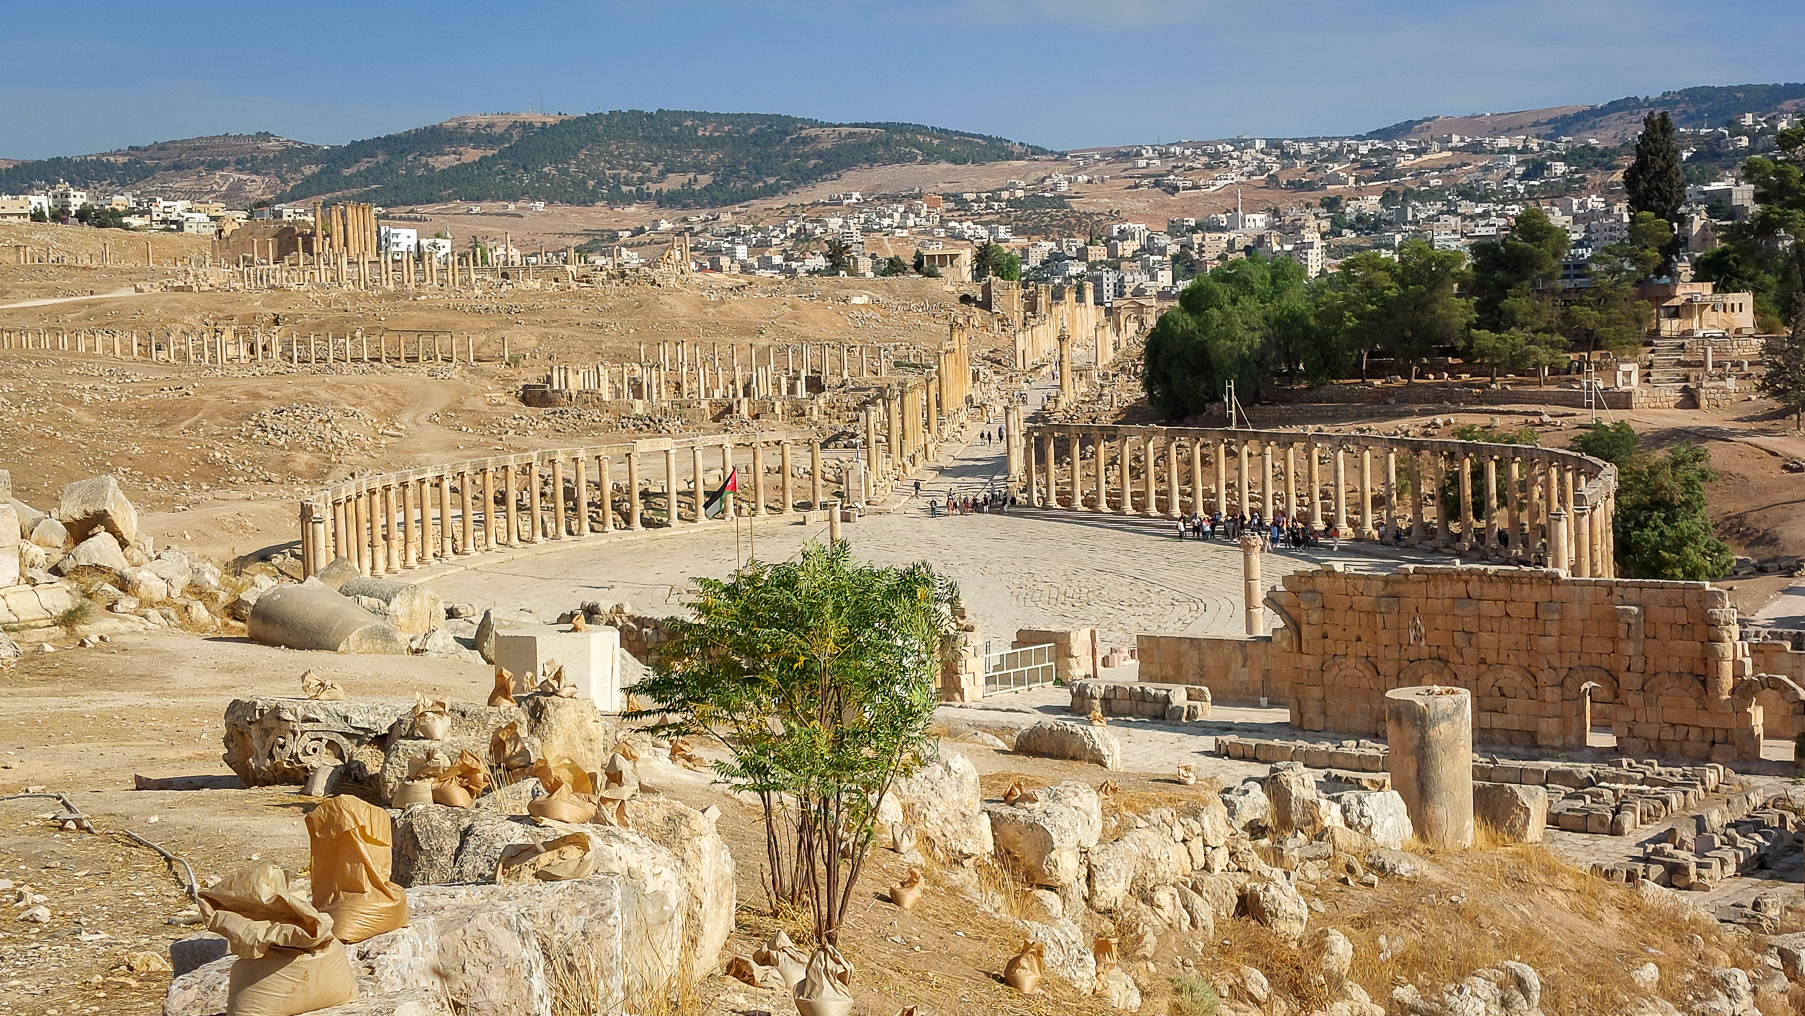 <span  class="uc_style_uc_tiles_grid_image_elementor_uc_items_attribute_title" style="color:#ffffff;">The Archaeological Site of 'Jerash' (the Romans did a great job there, that very much reminds of Rom)</span>